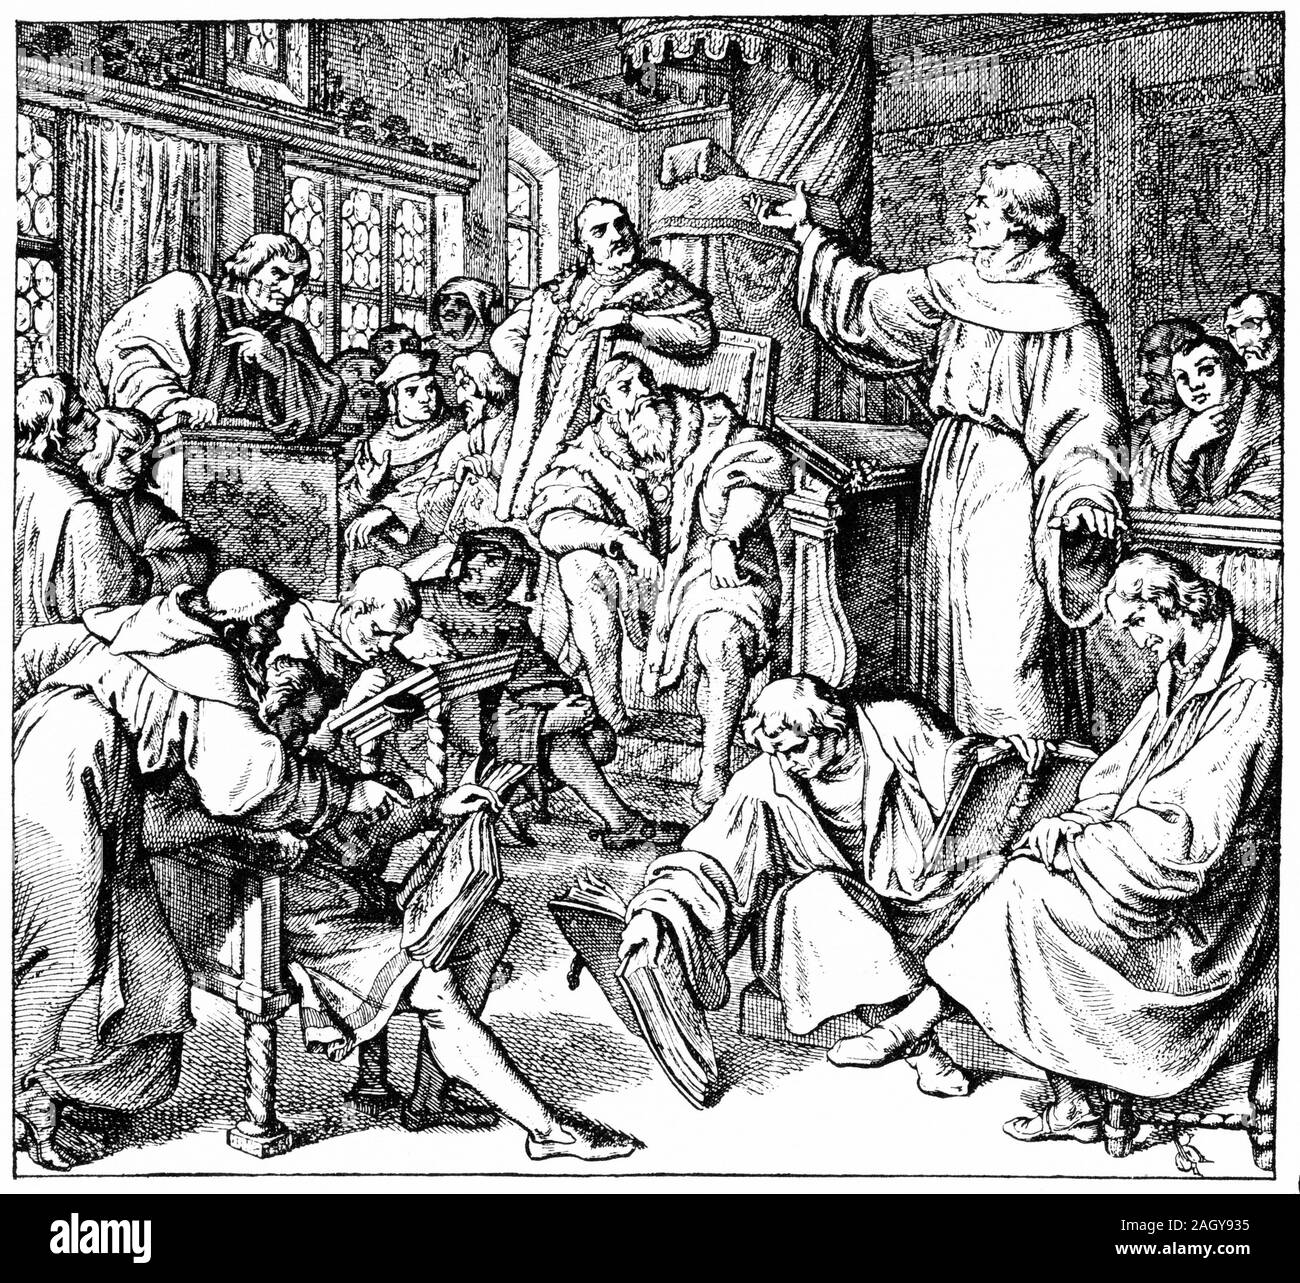 Engraving of the Leipzig Debate (German: Leipziger Disputation) a theological disputation originally between Andreas Karlstadt, Martin Luther, and Johann Eck in June and July 1519 at Pleissenburg Castle in Leipzig, Germany. Stock Photo